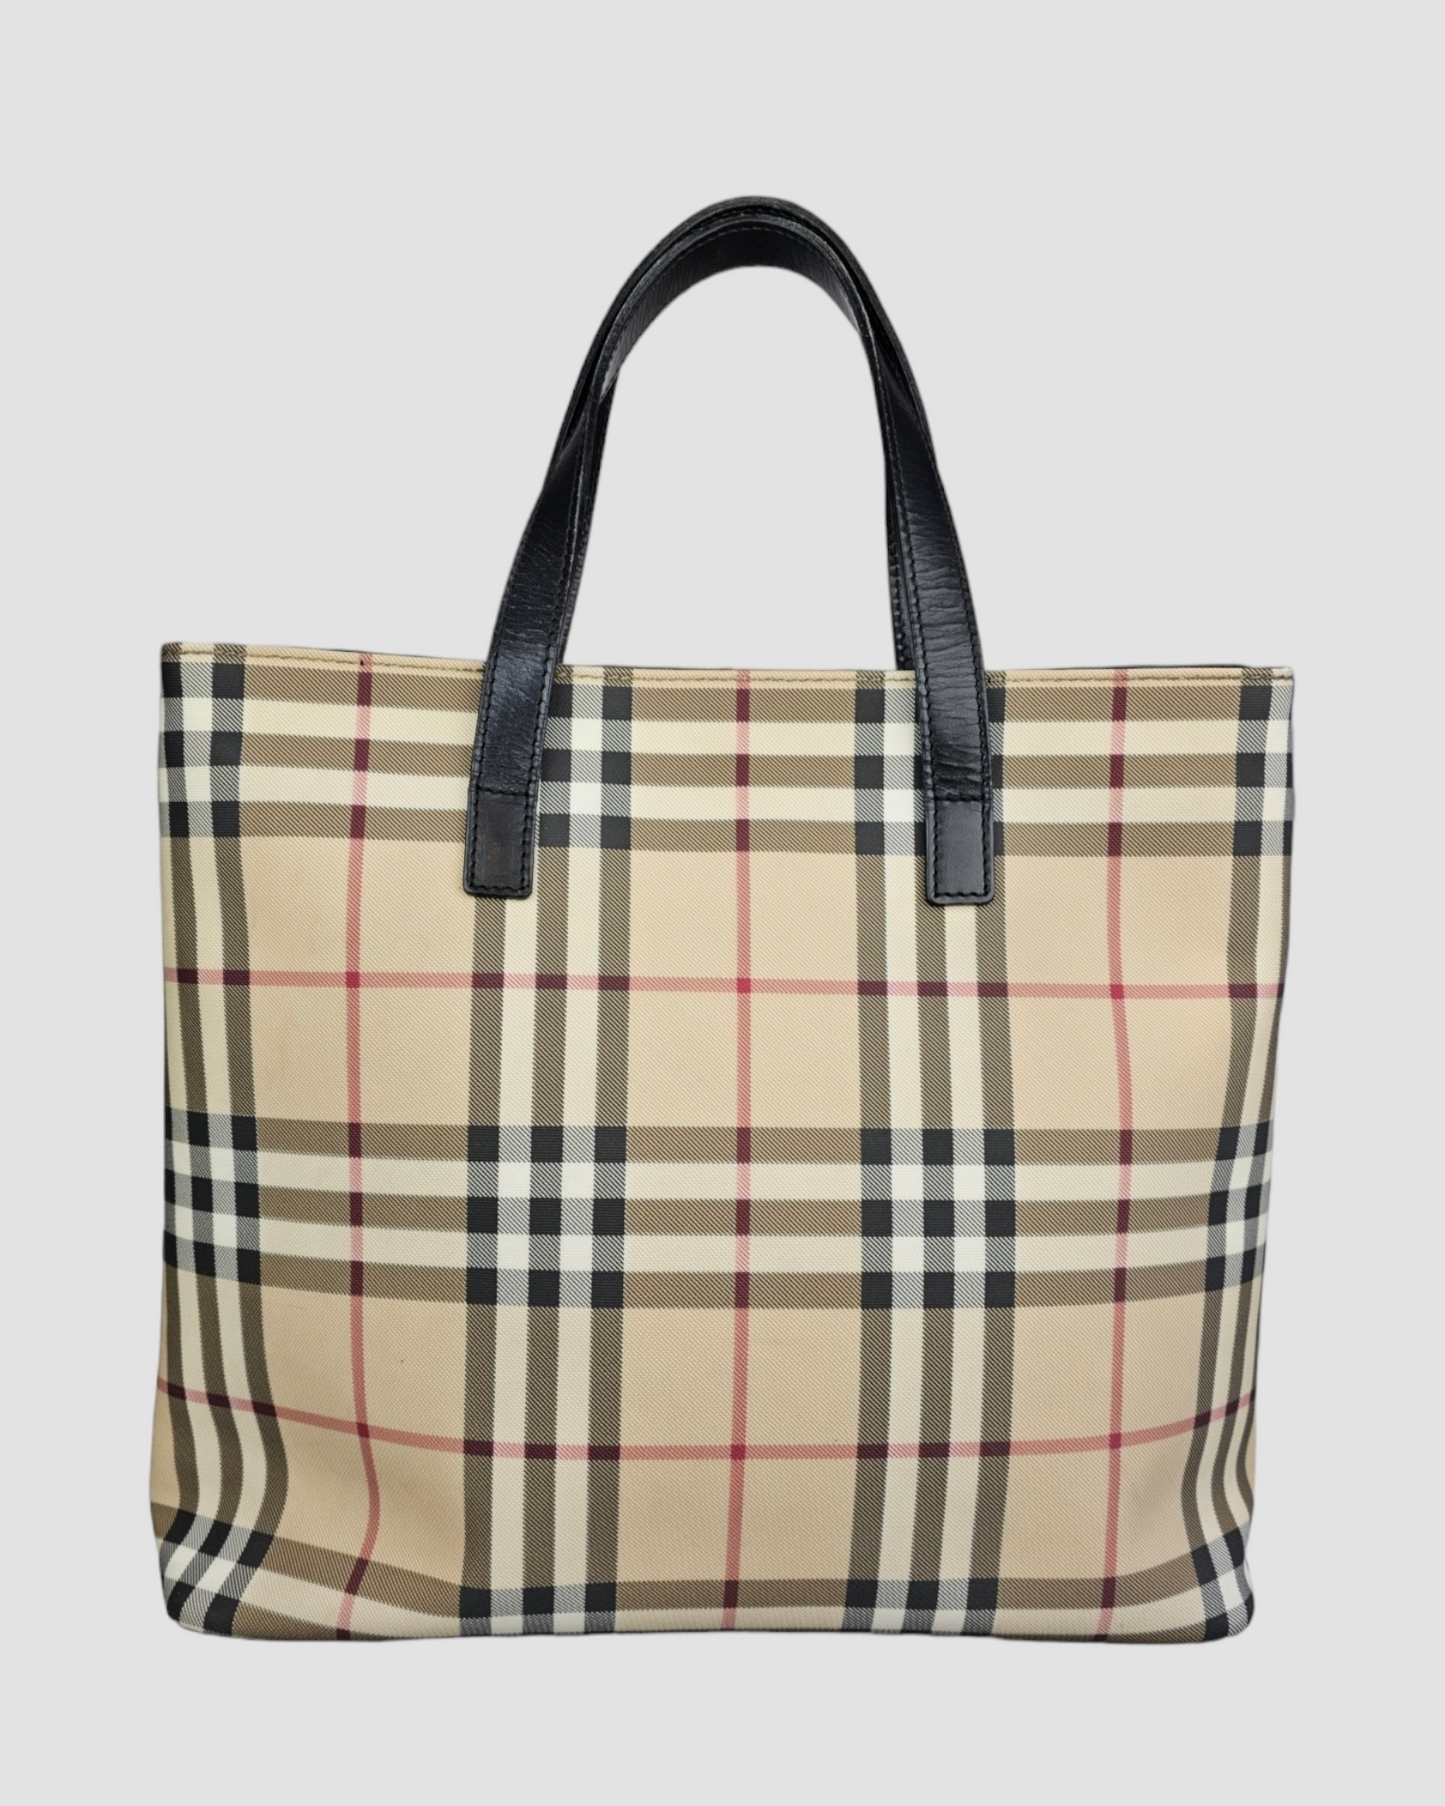 Burberry London Tote